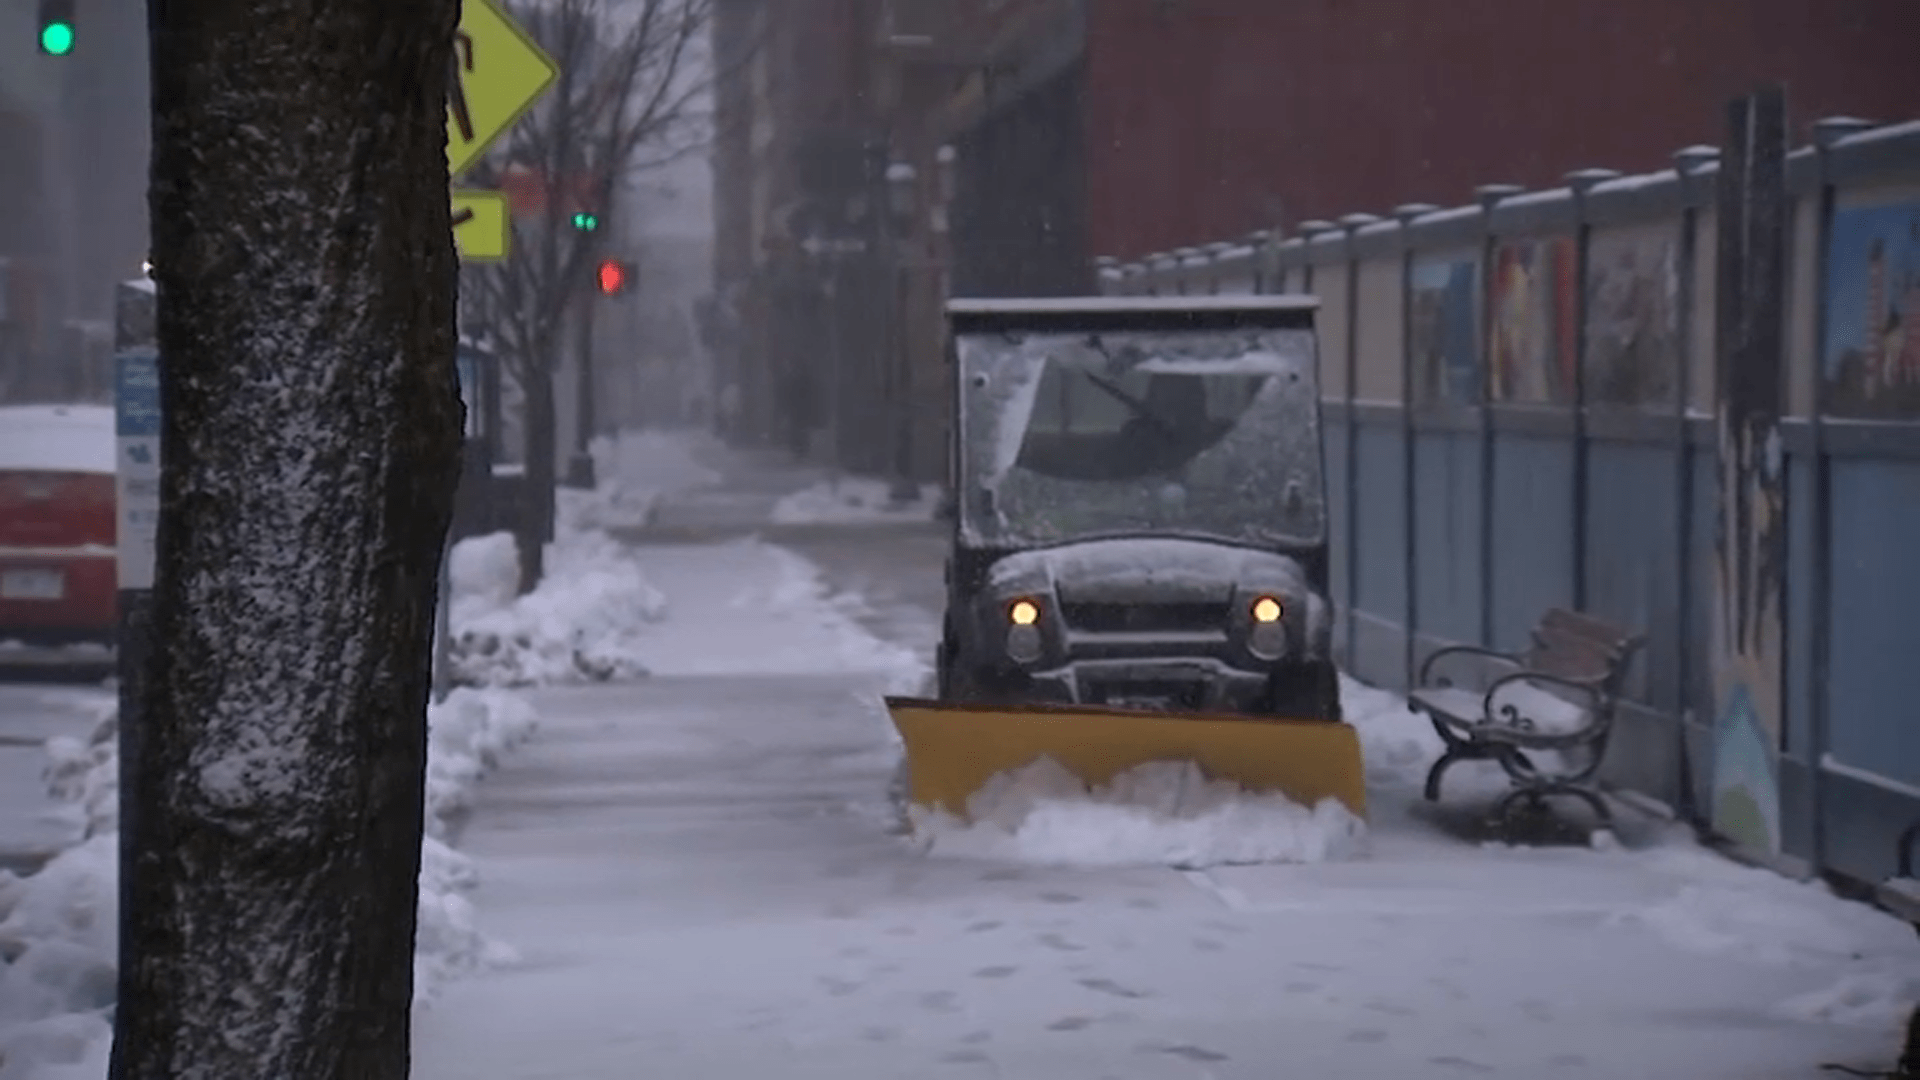 Power Outages, School Closings and Icy Roads: Clean Up Underway After Monday's Snow Storm